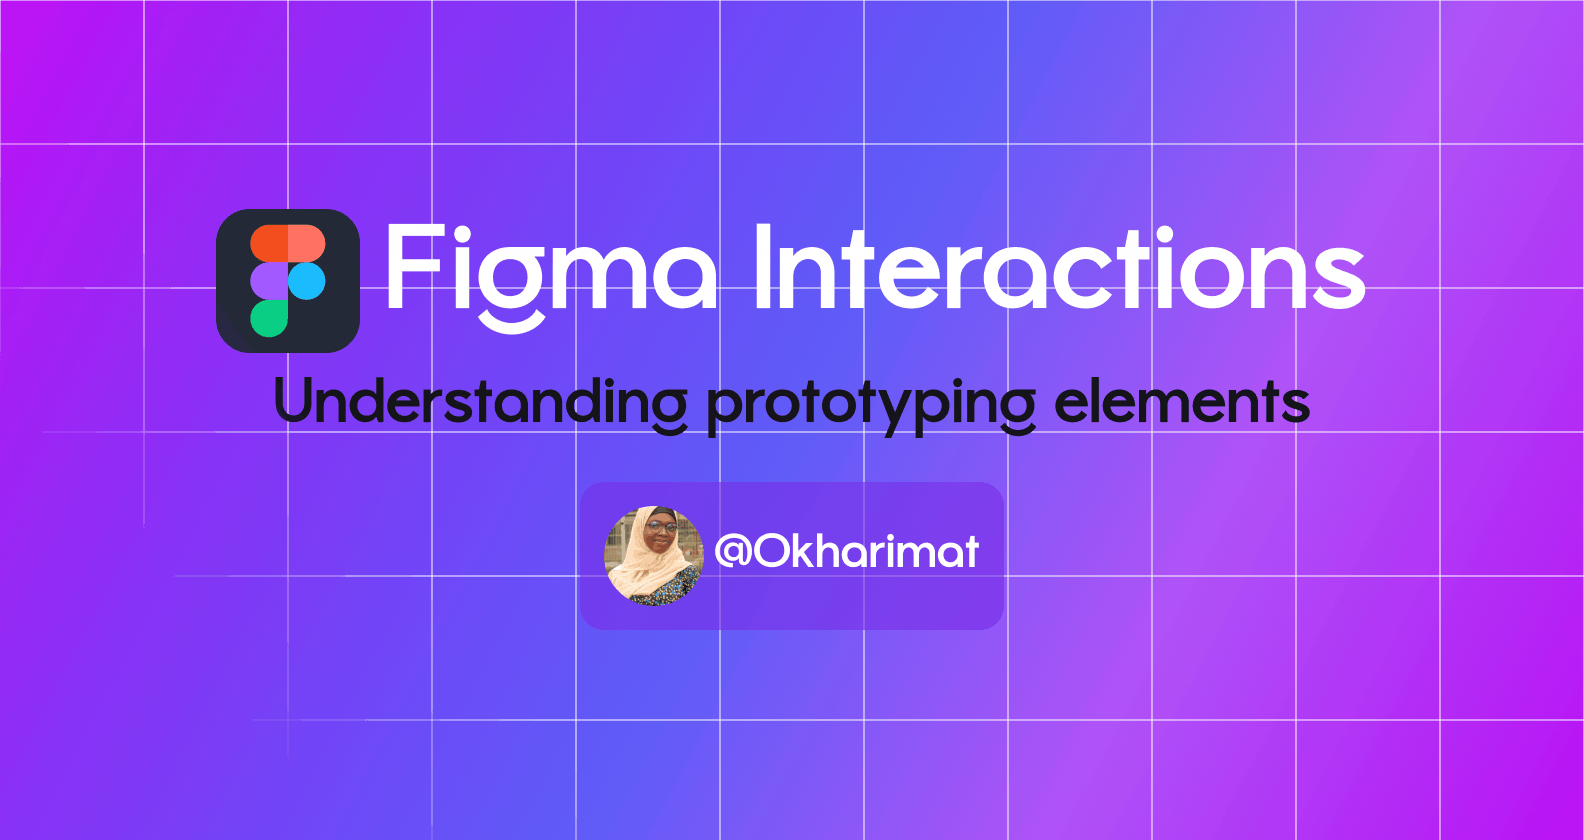 Figma Interactions